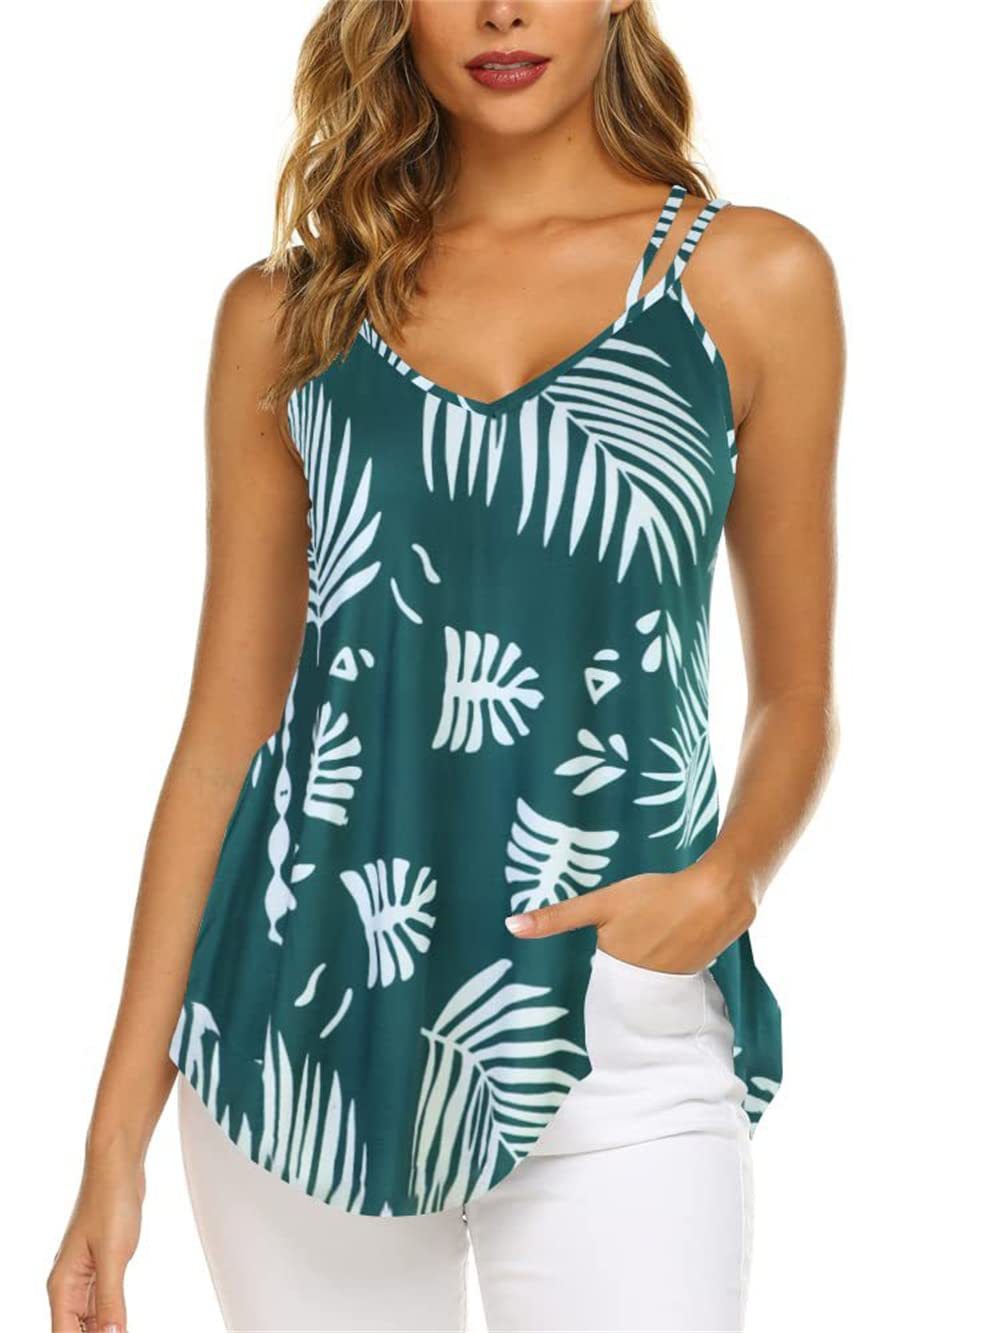 Women's Summer Sexy V-neck Double-strap Cotton-like Printed Blouses